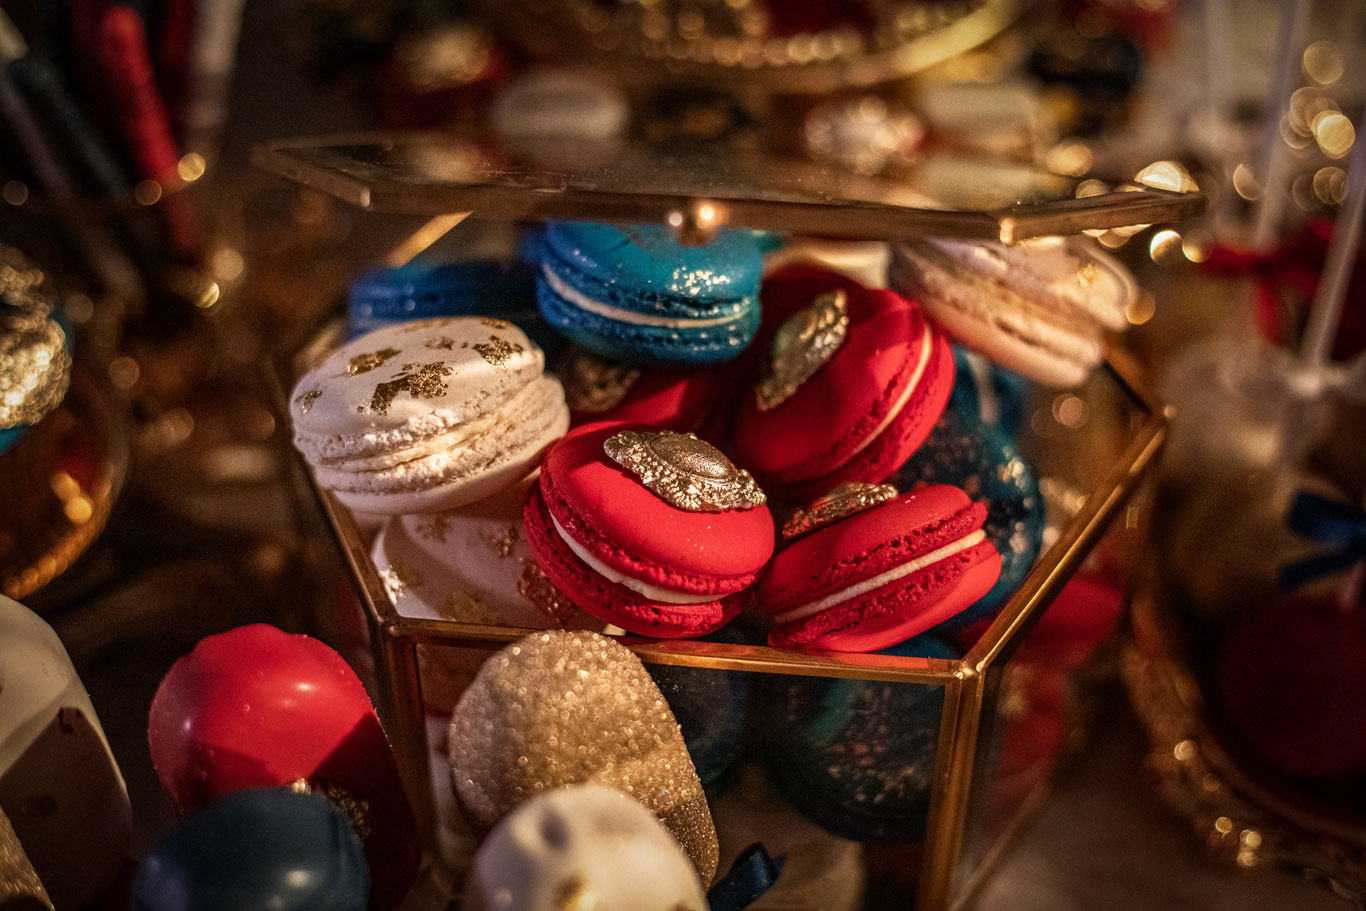 Ornate macarons bursting out of a gold bordered glass box, red, white and blue with elegant designs